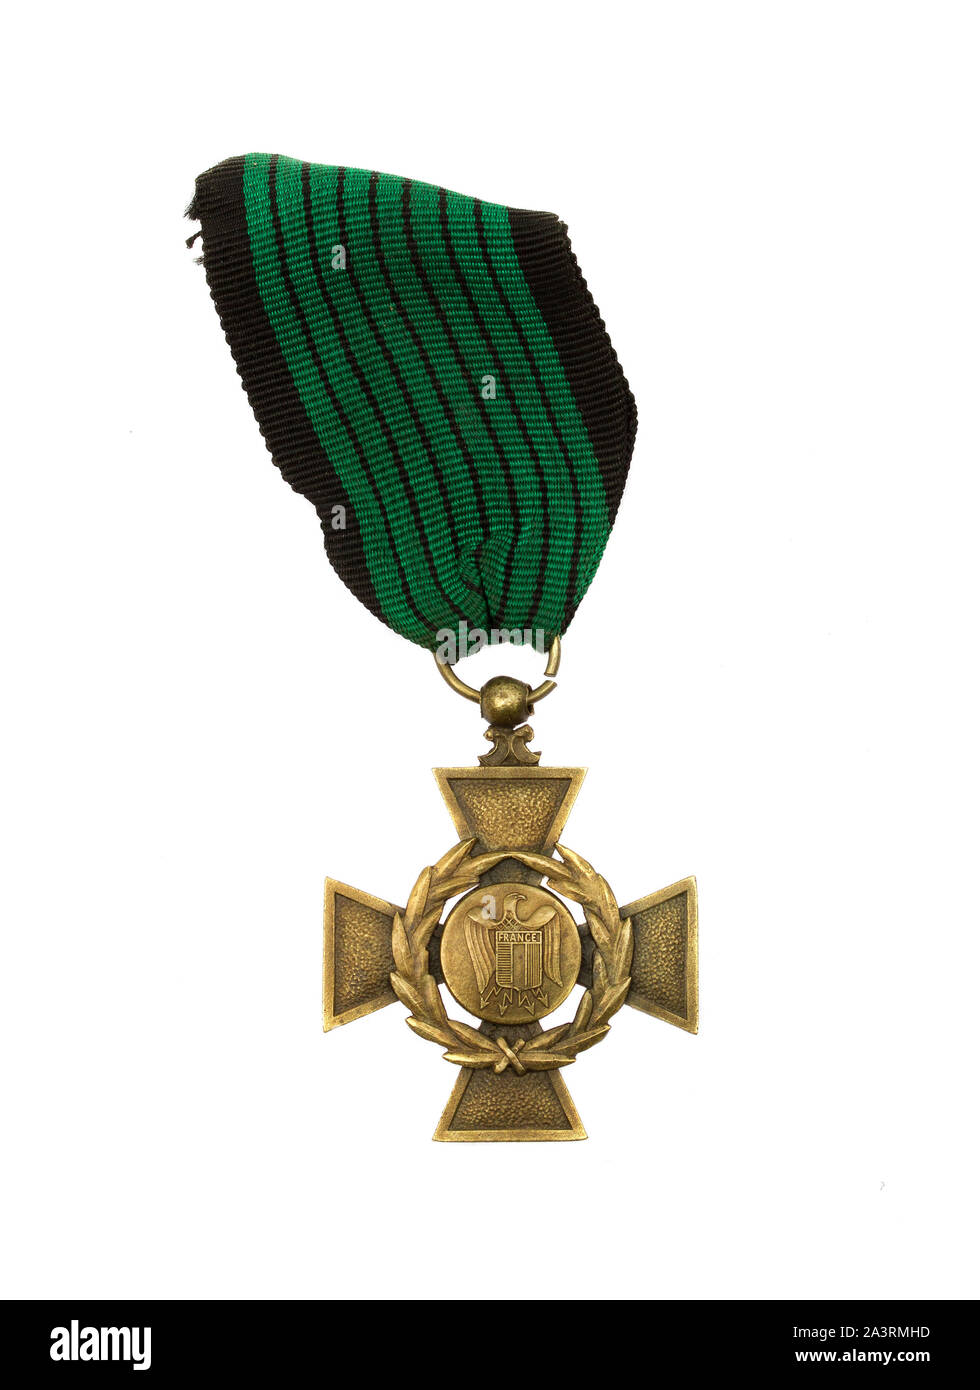 French war cross Legionnaire Croix de Guerre Légionnaire, a rare Vichy Award instituted in July 6, 1942, in recognition for the heroic military contri Stock Photo